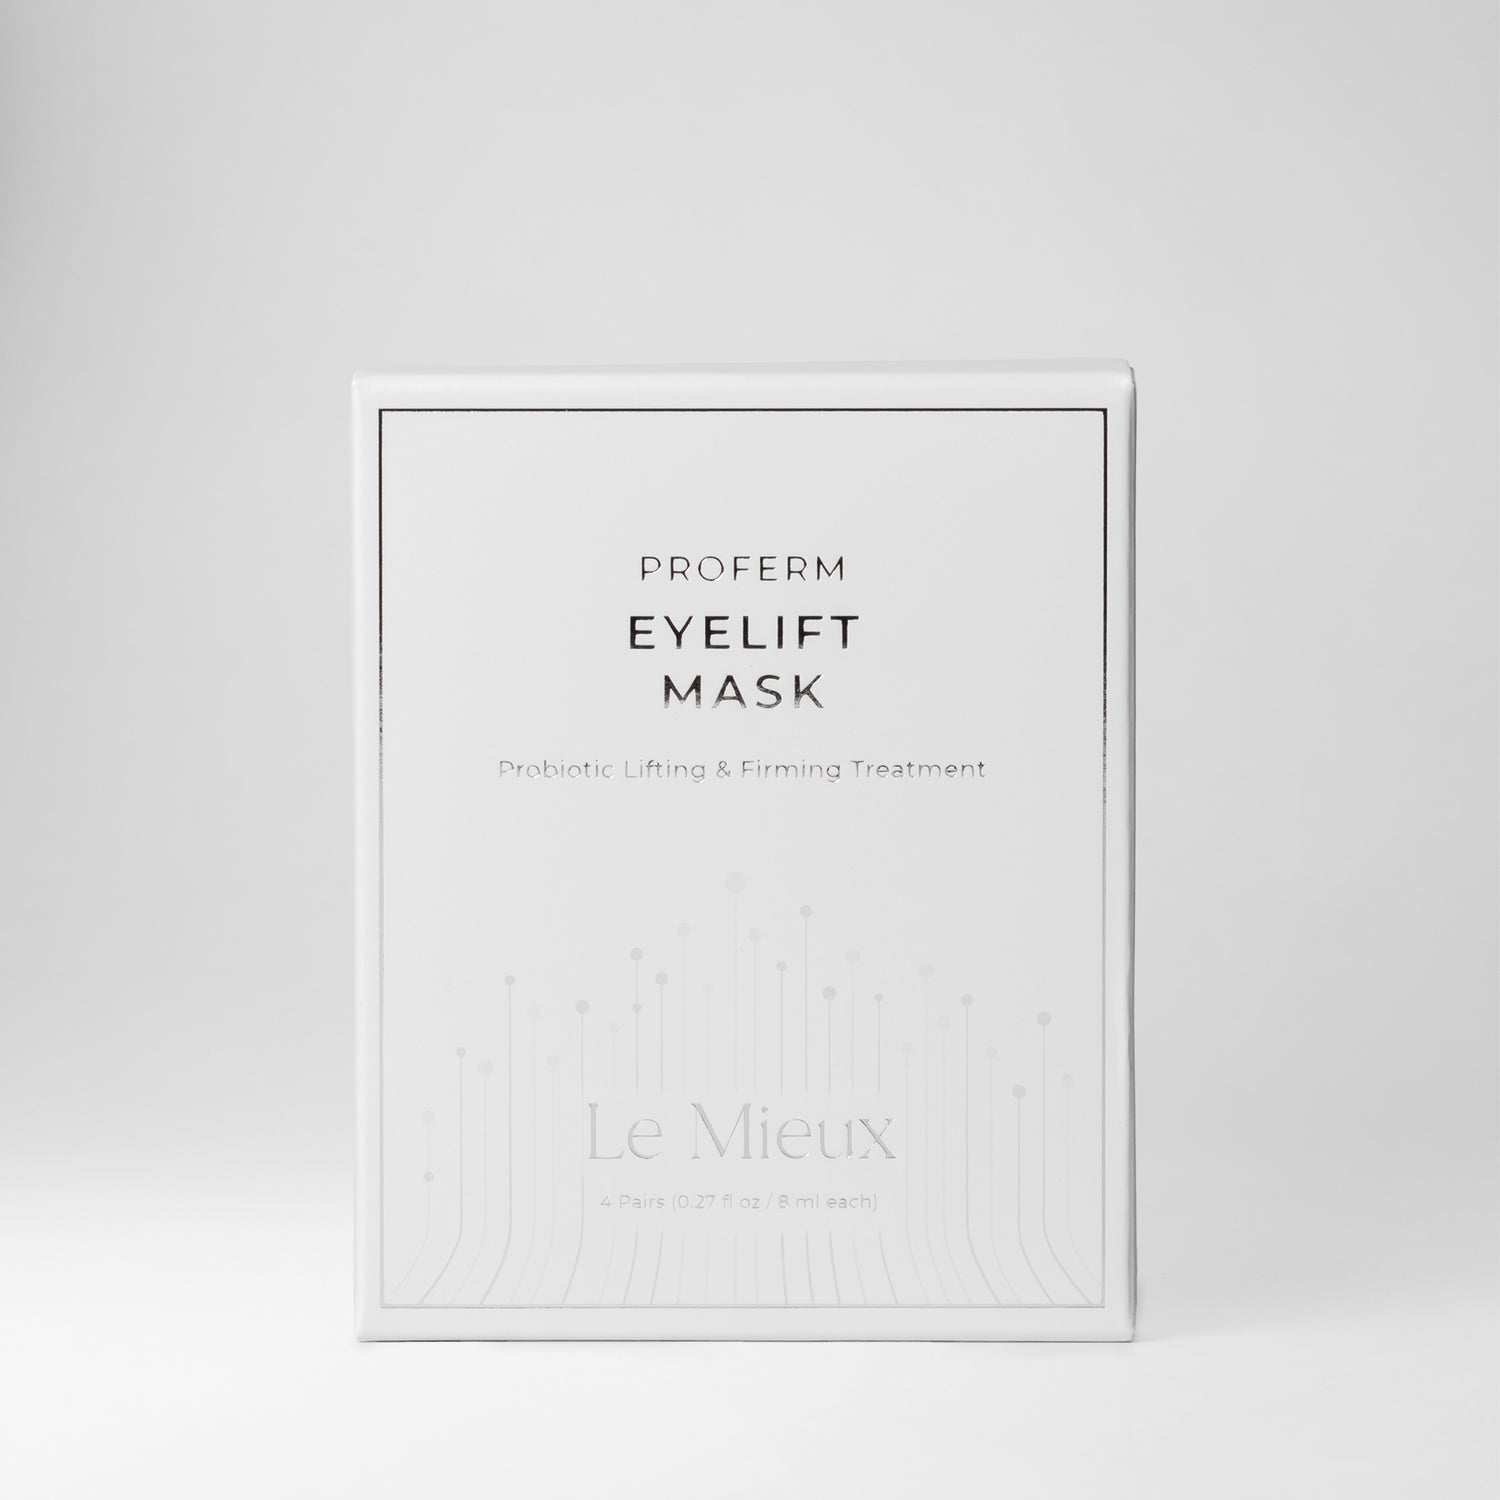  ProFerm Eyelift Mask from Le Mieux Skincare - featured